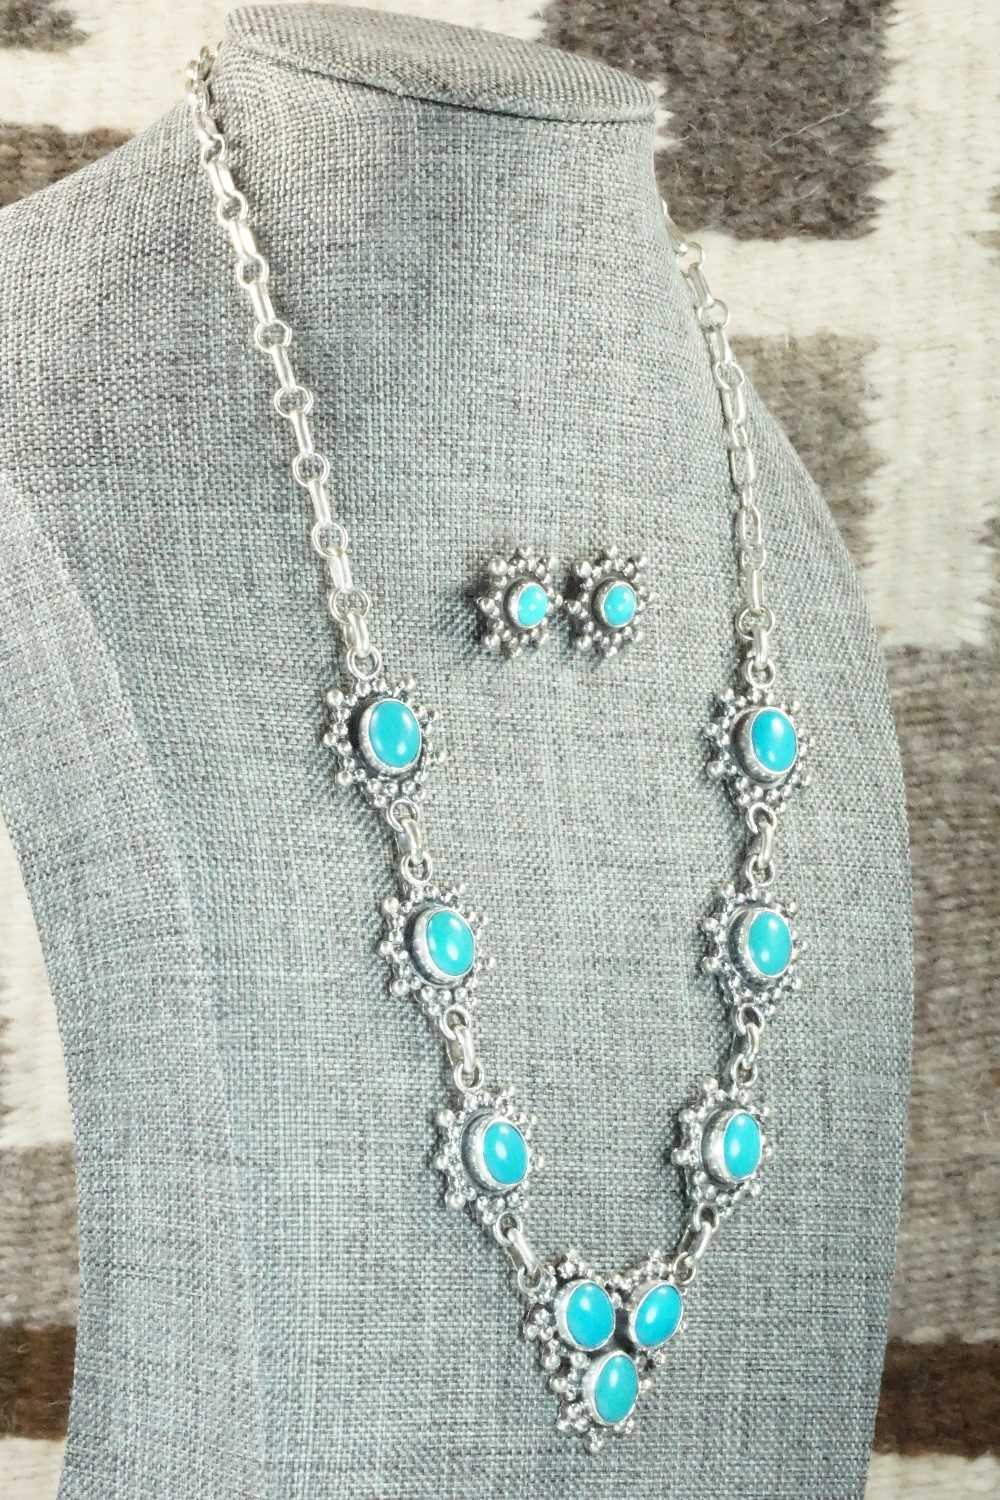 Turquoise & Sterling Silver Necklace and Earrings Set - Roie Jaque